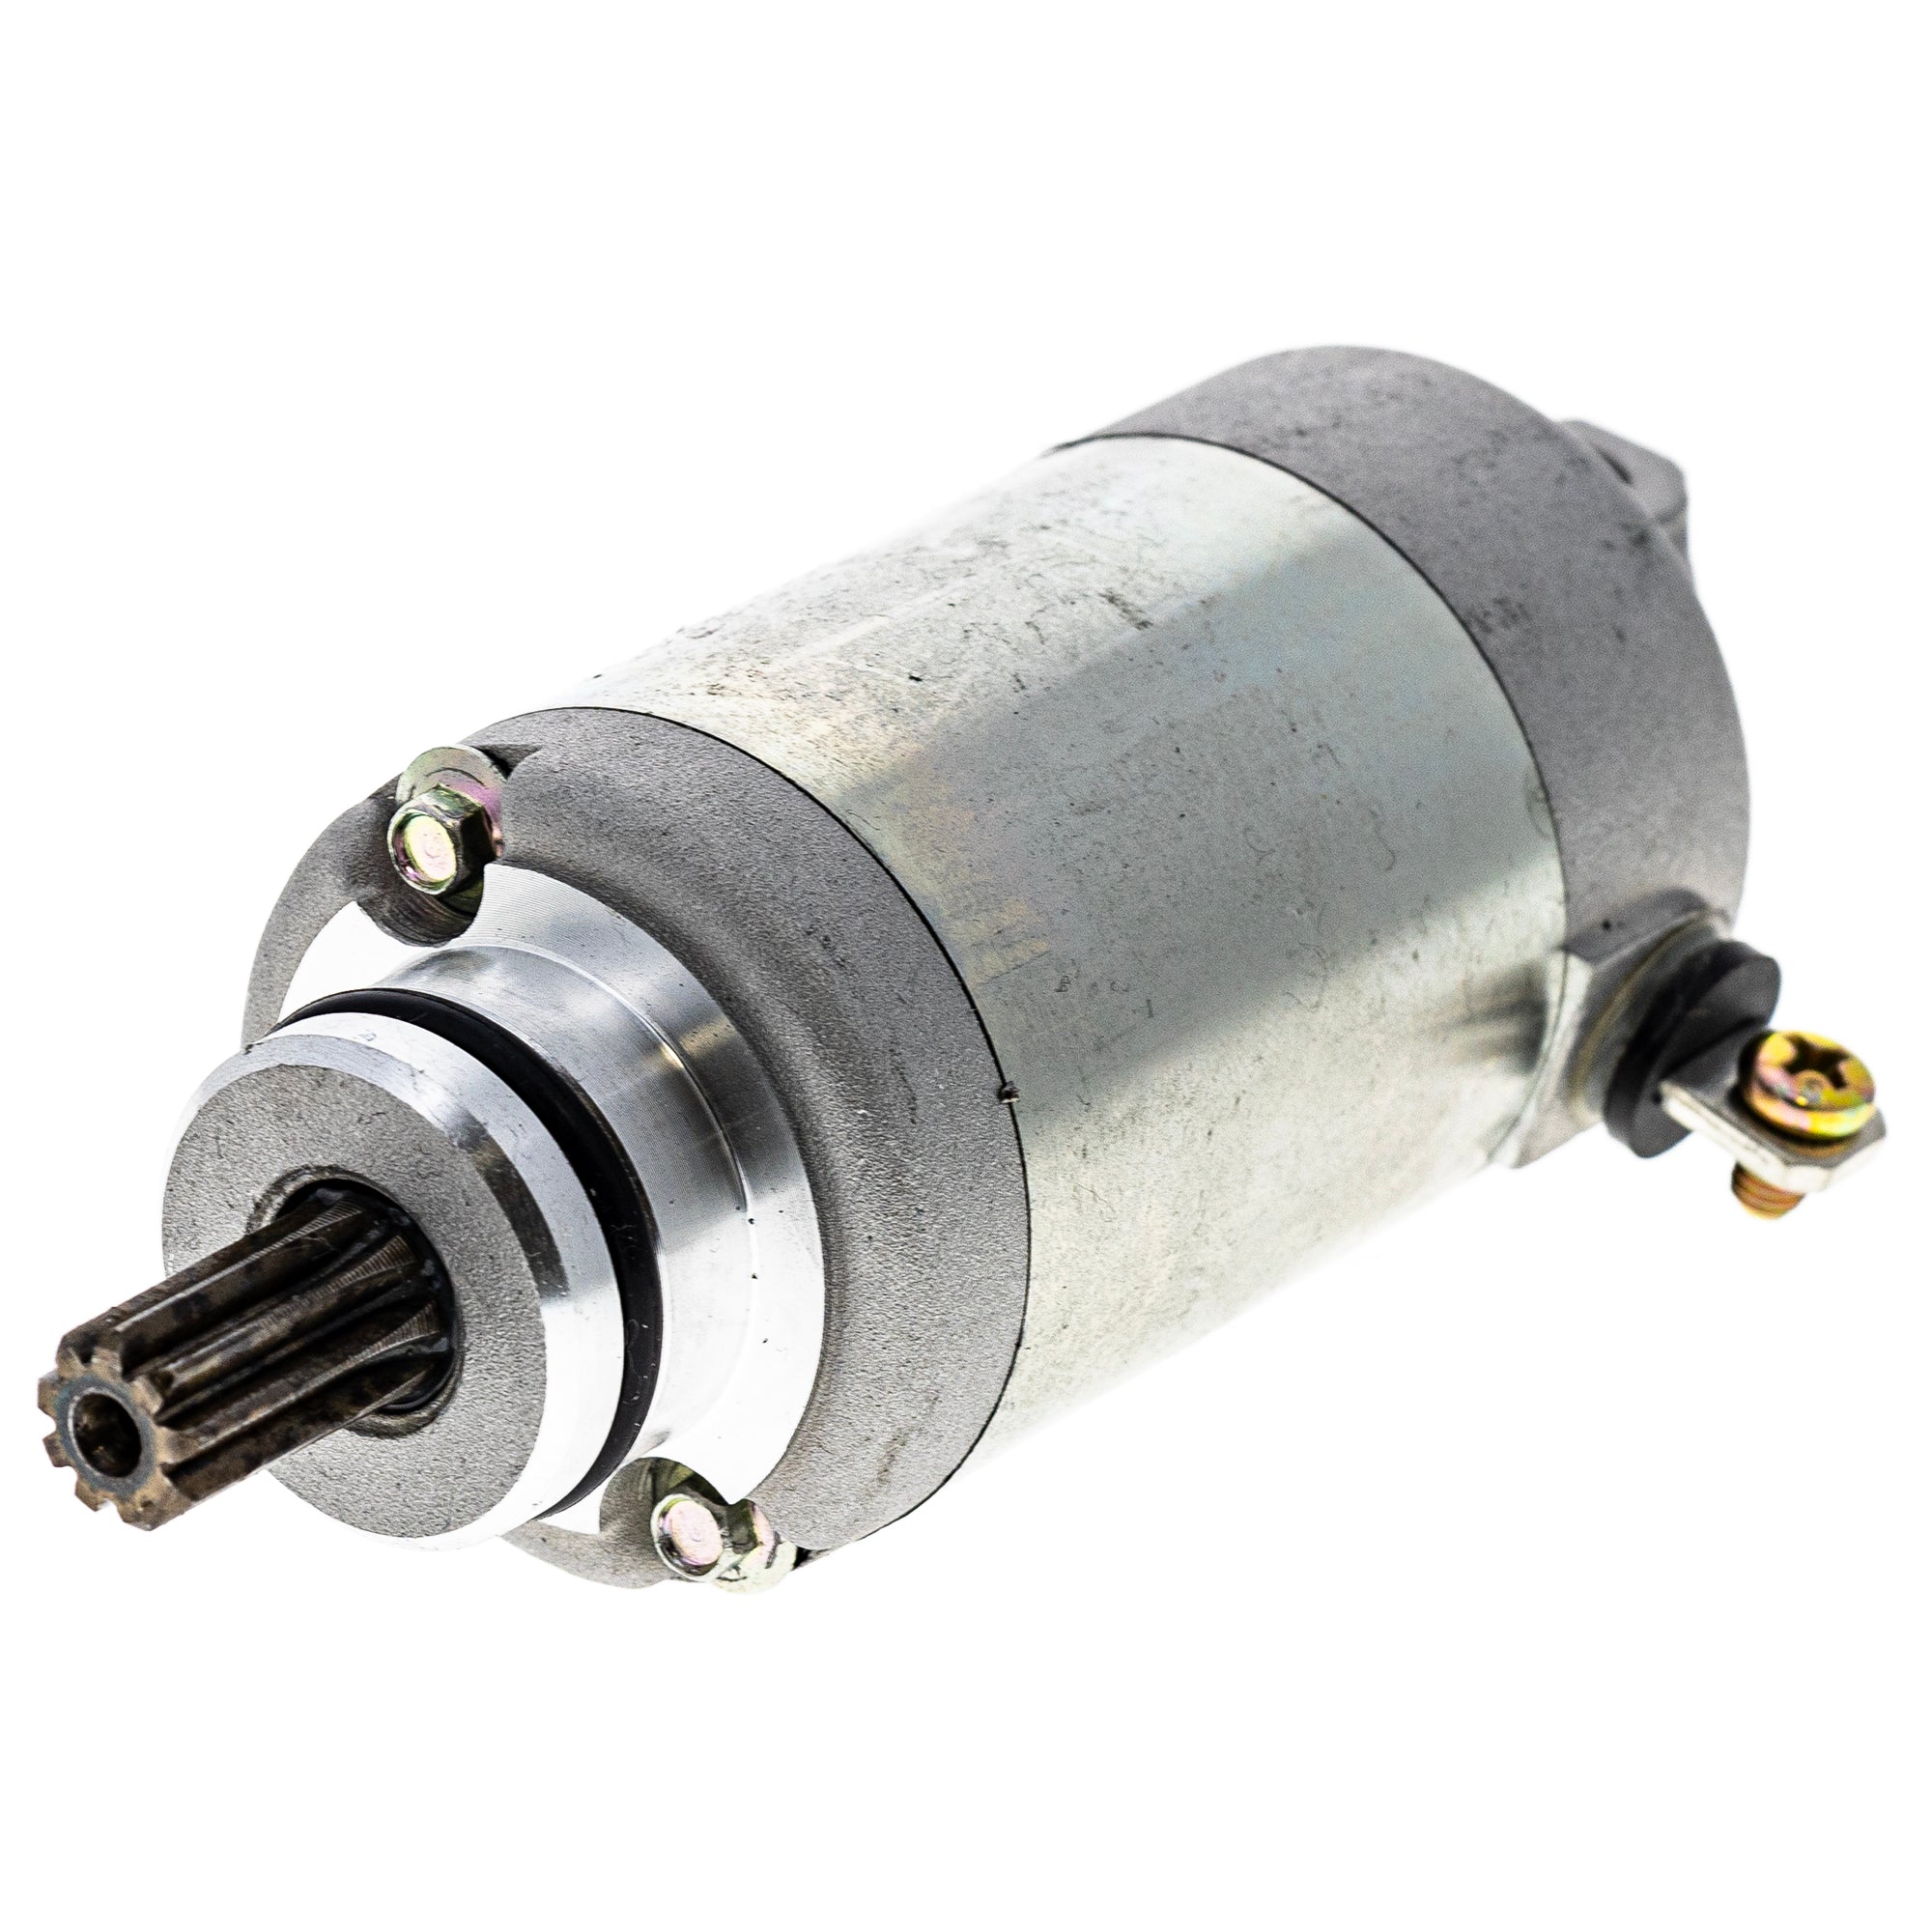 Starter Motor Assembly for zOTHER YZ250FX WR250F NICHE 519-CSM2524O